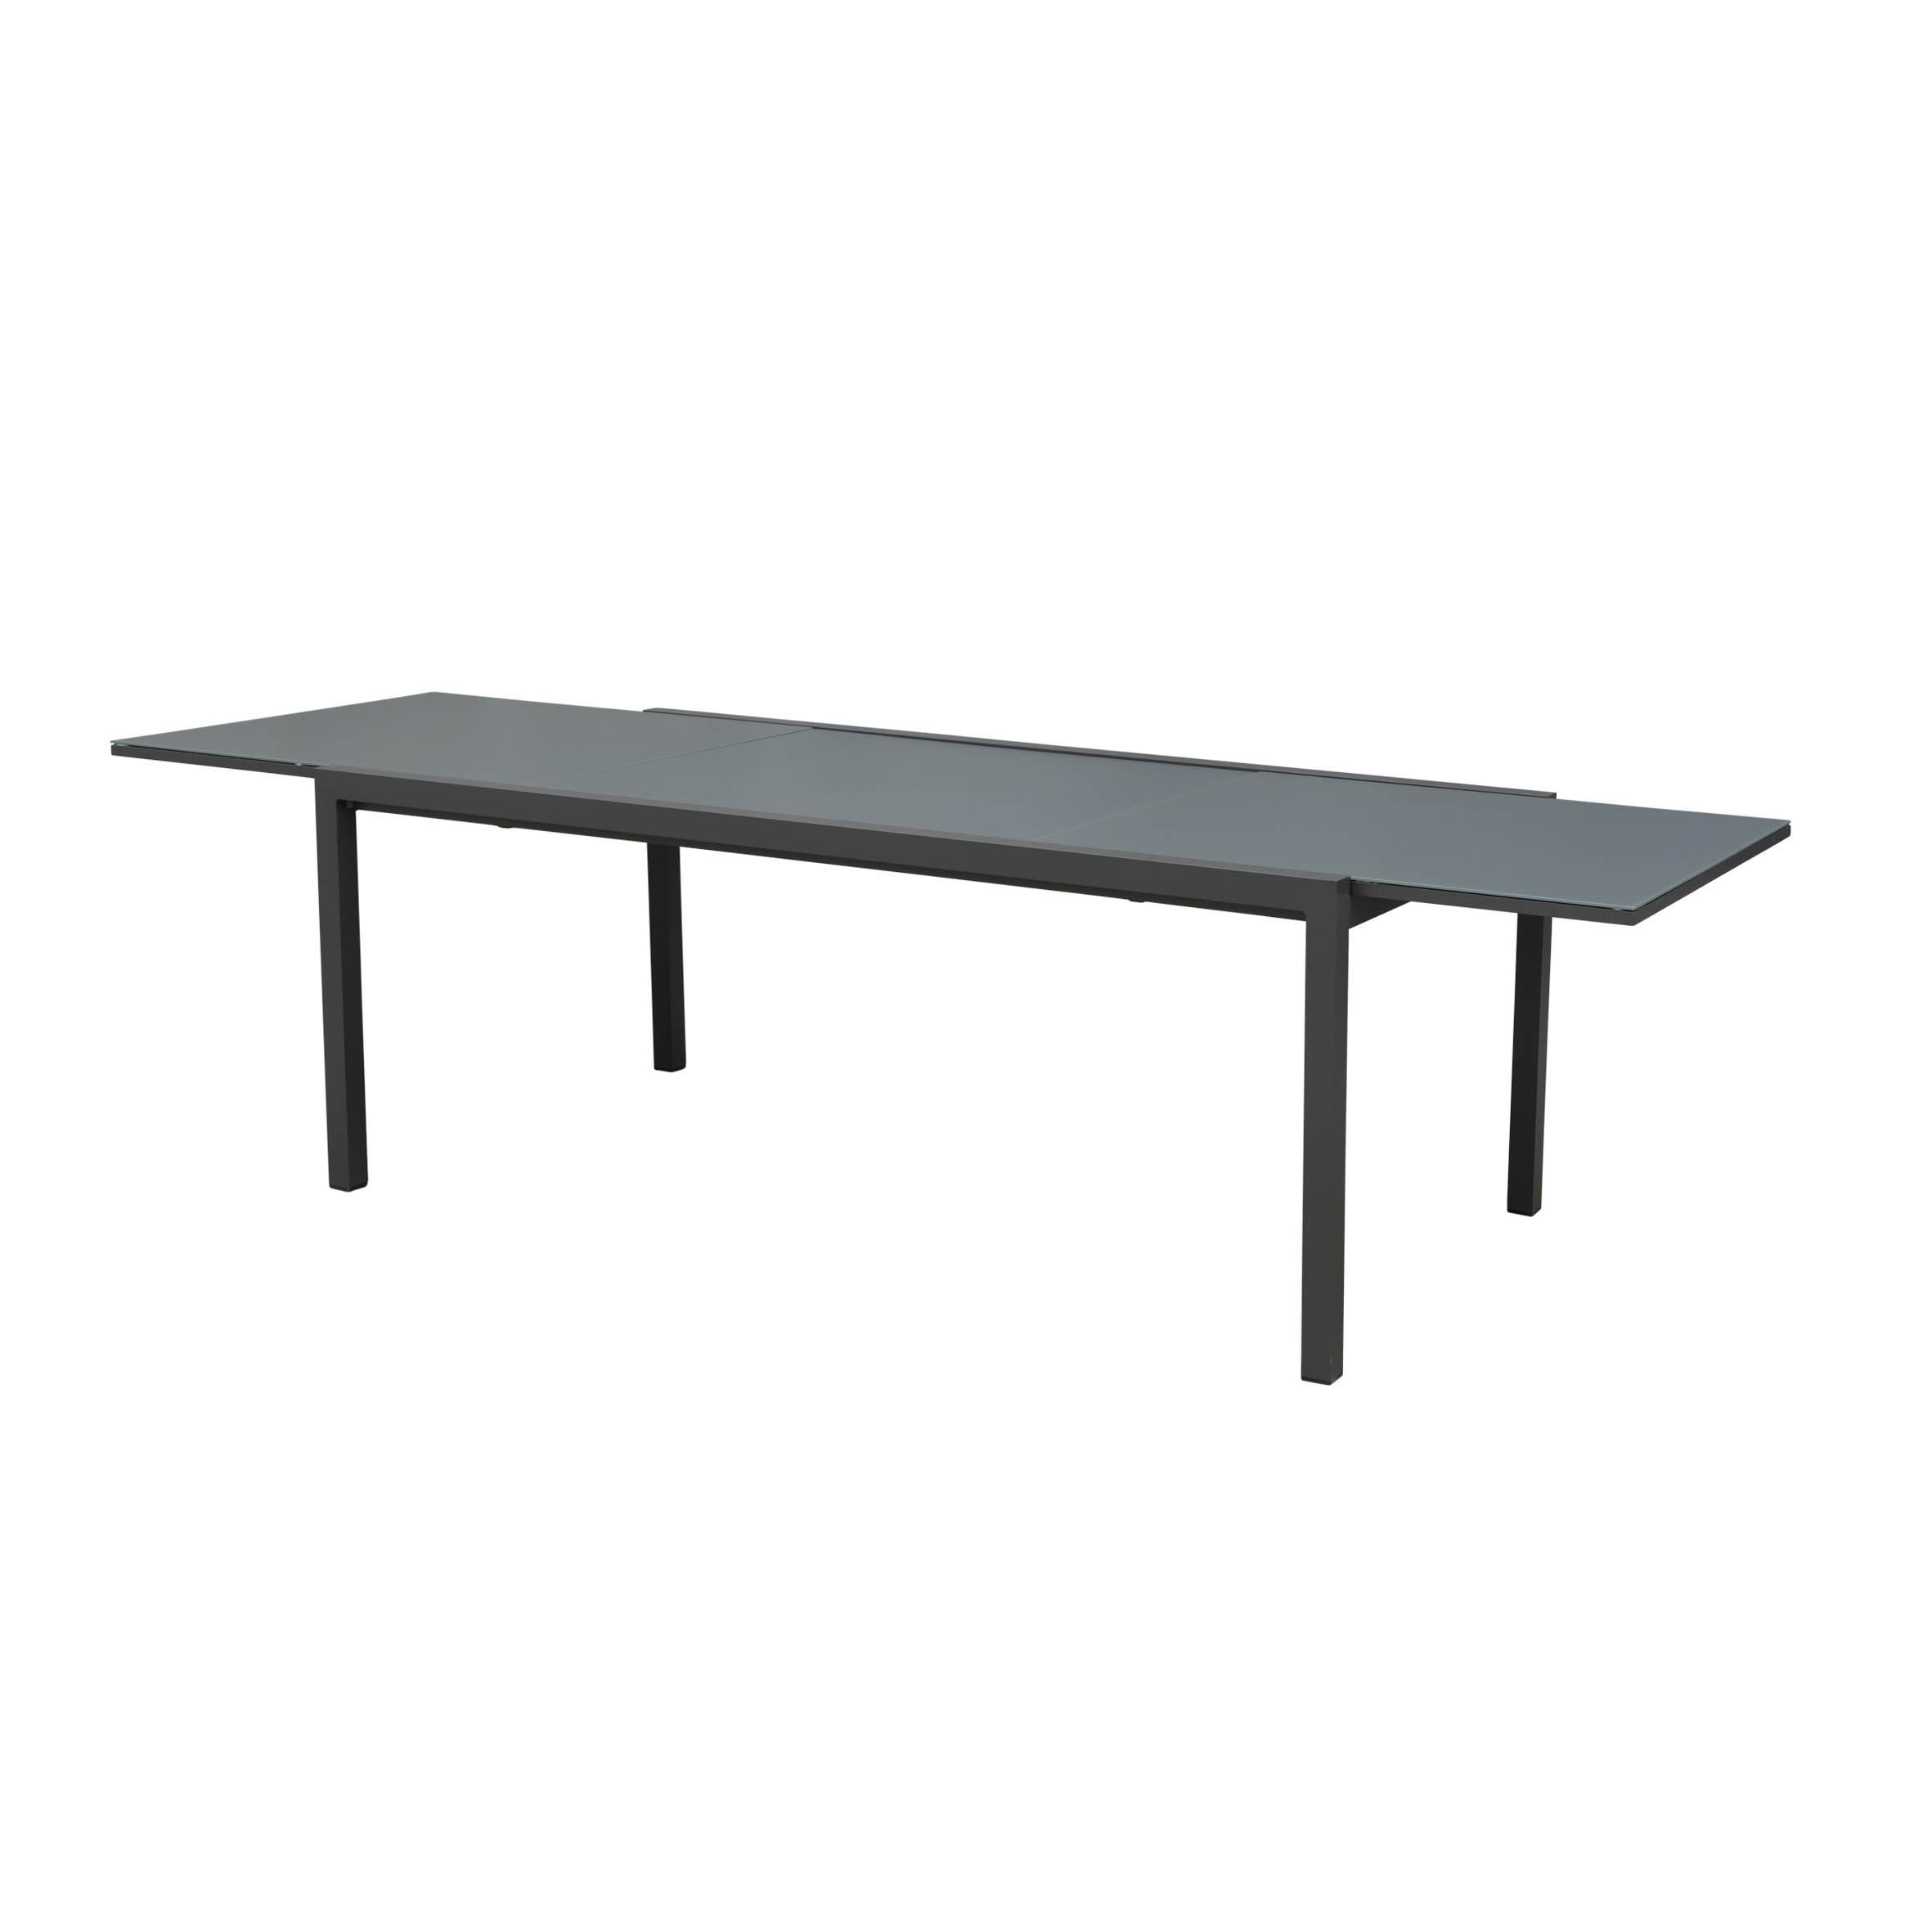 Kotka extension table S1